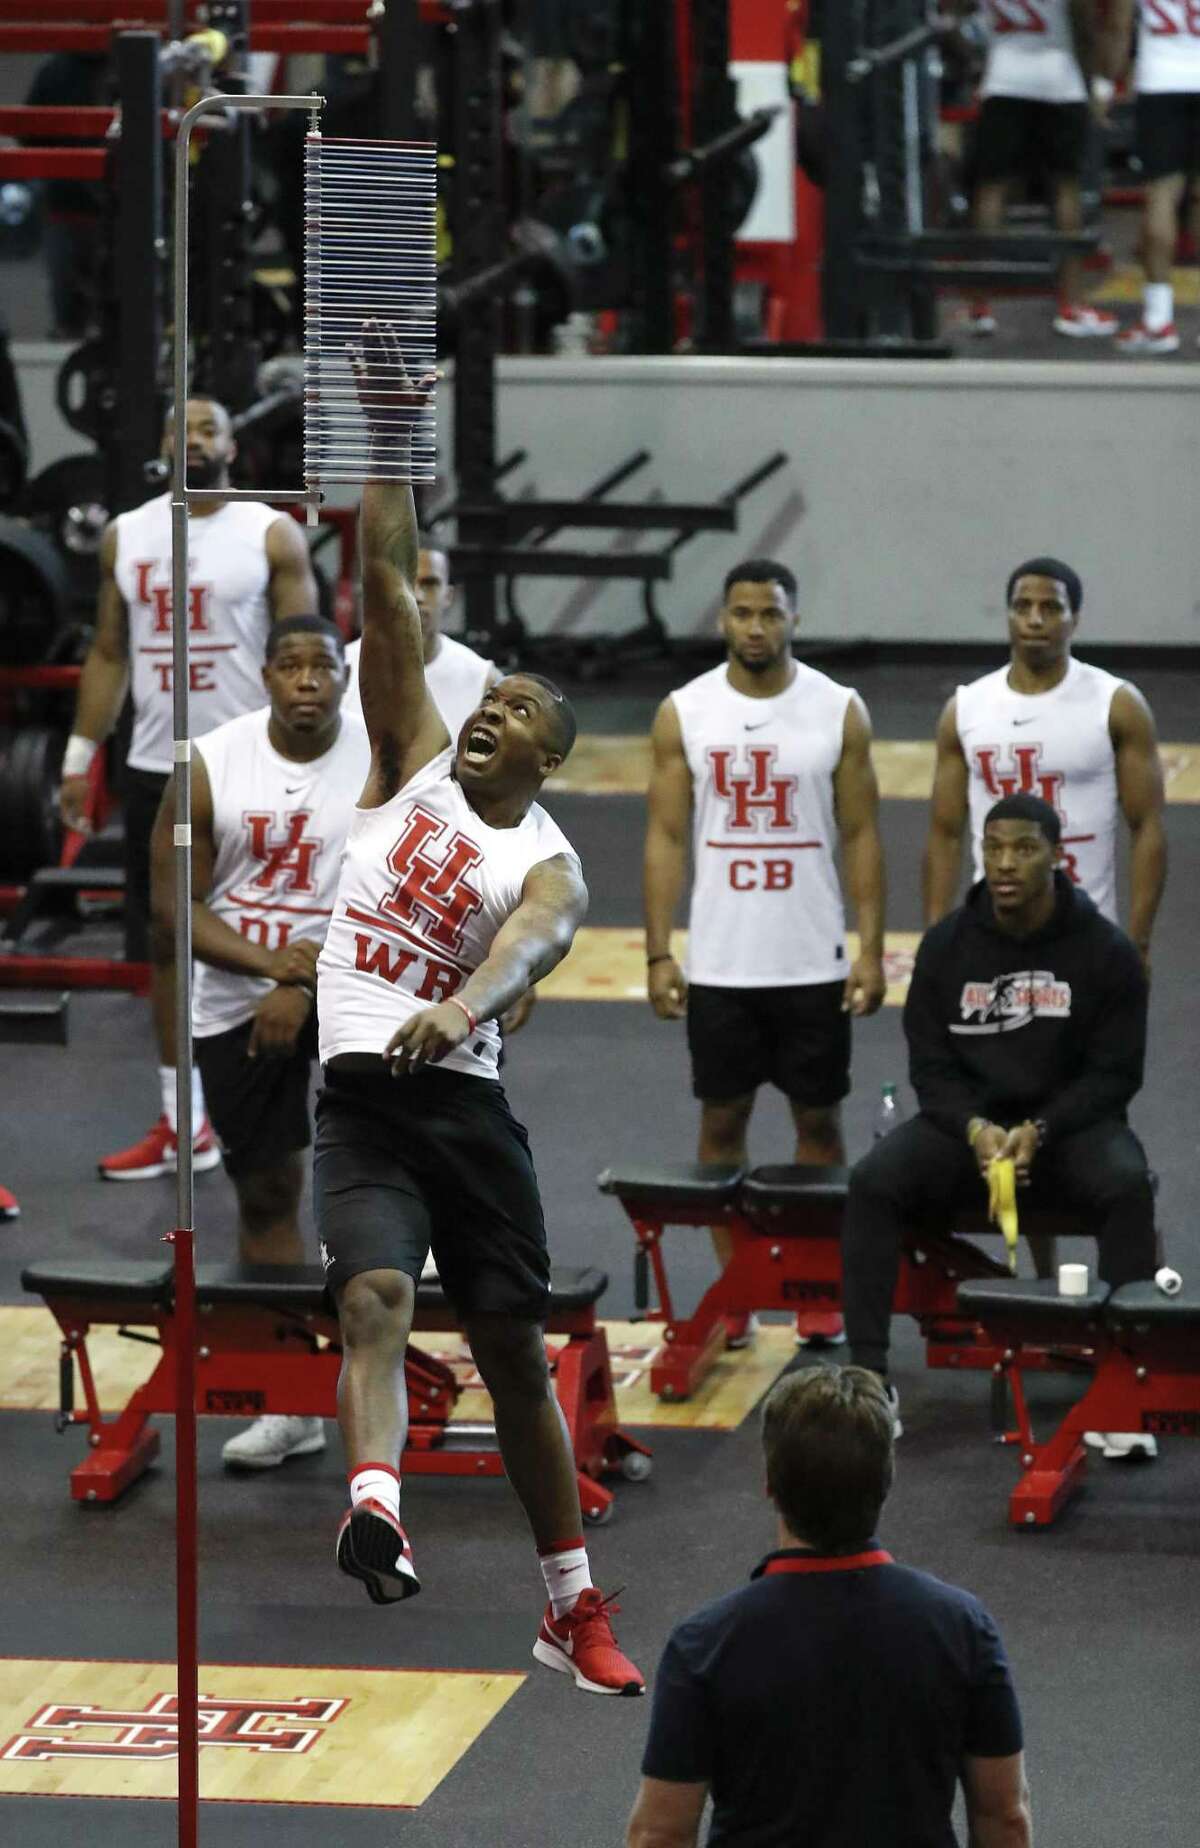 Kinte Hatton participates in the vertical jump testing in the weight room of the UH Athletics/Alumni Center at the University of Houston Pro Day, Thursday, March 28, 2019, in Houston.